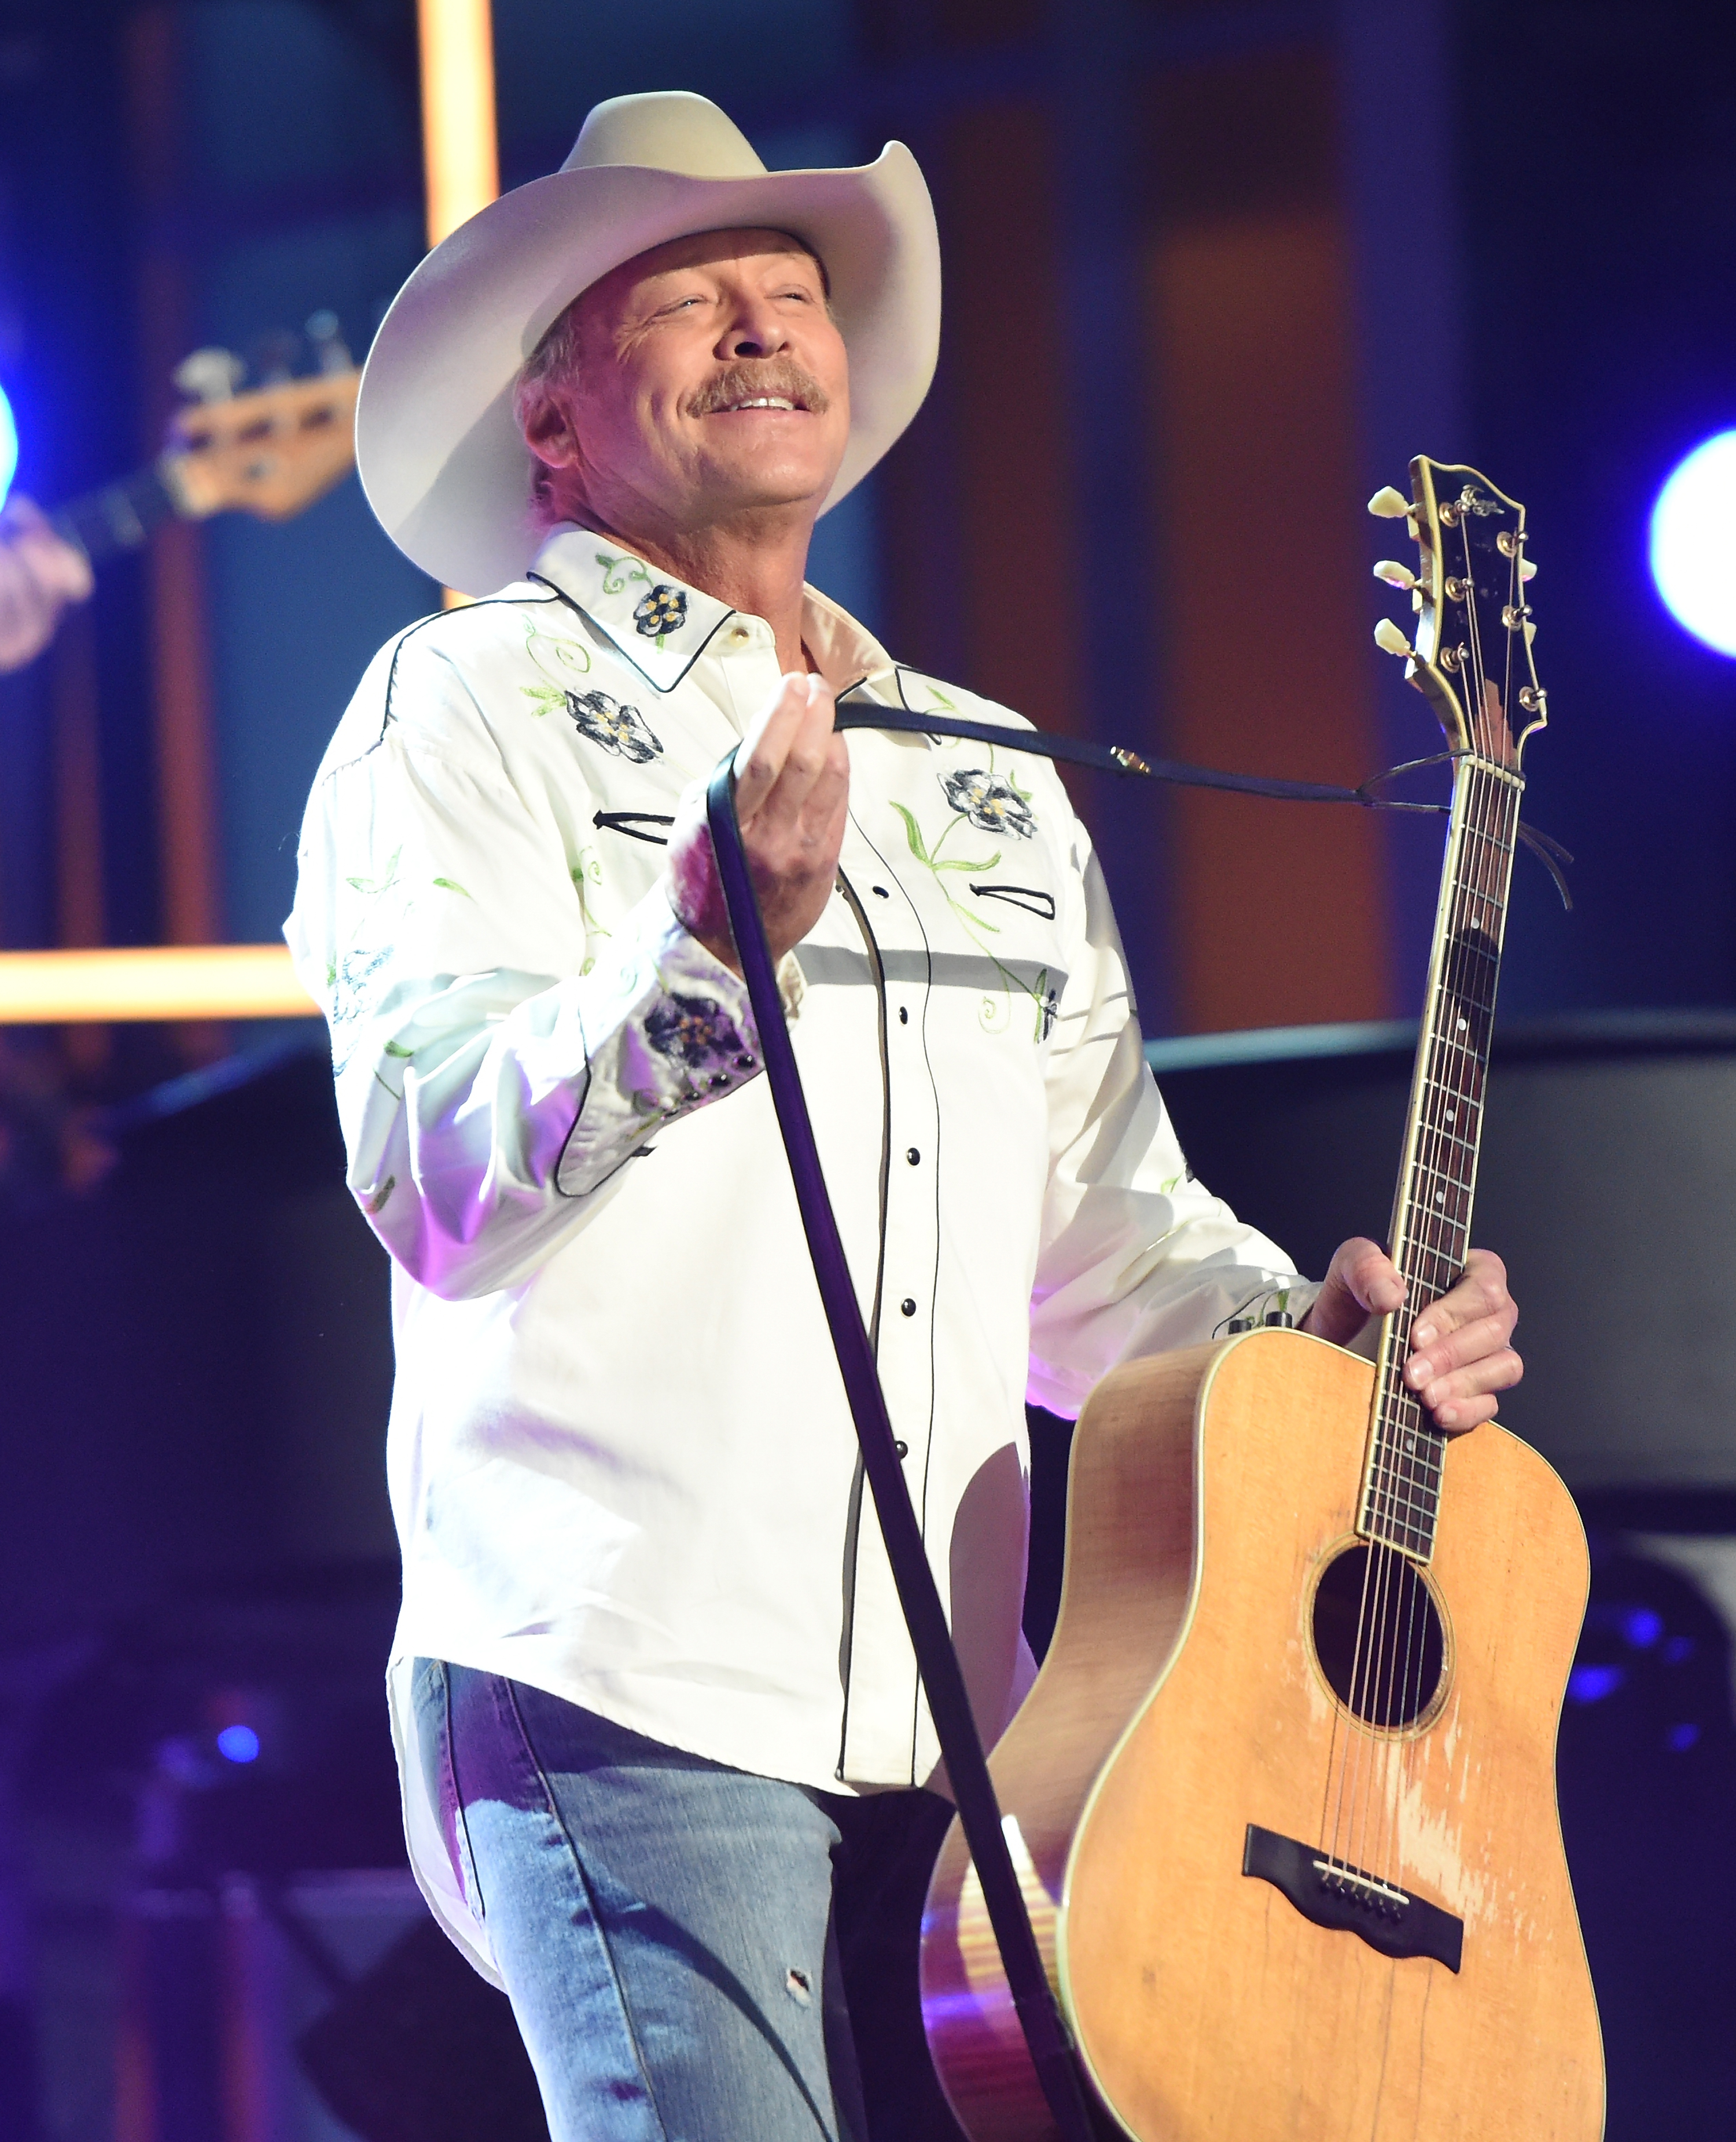 Alan Jackson performs during the 53rd Academy of Country Music Awards at MGM Grand Garden Arena on April 15, 2018 in Las Vegas, Nevada | Source: Getty Images